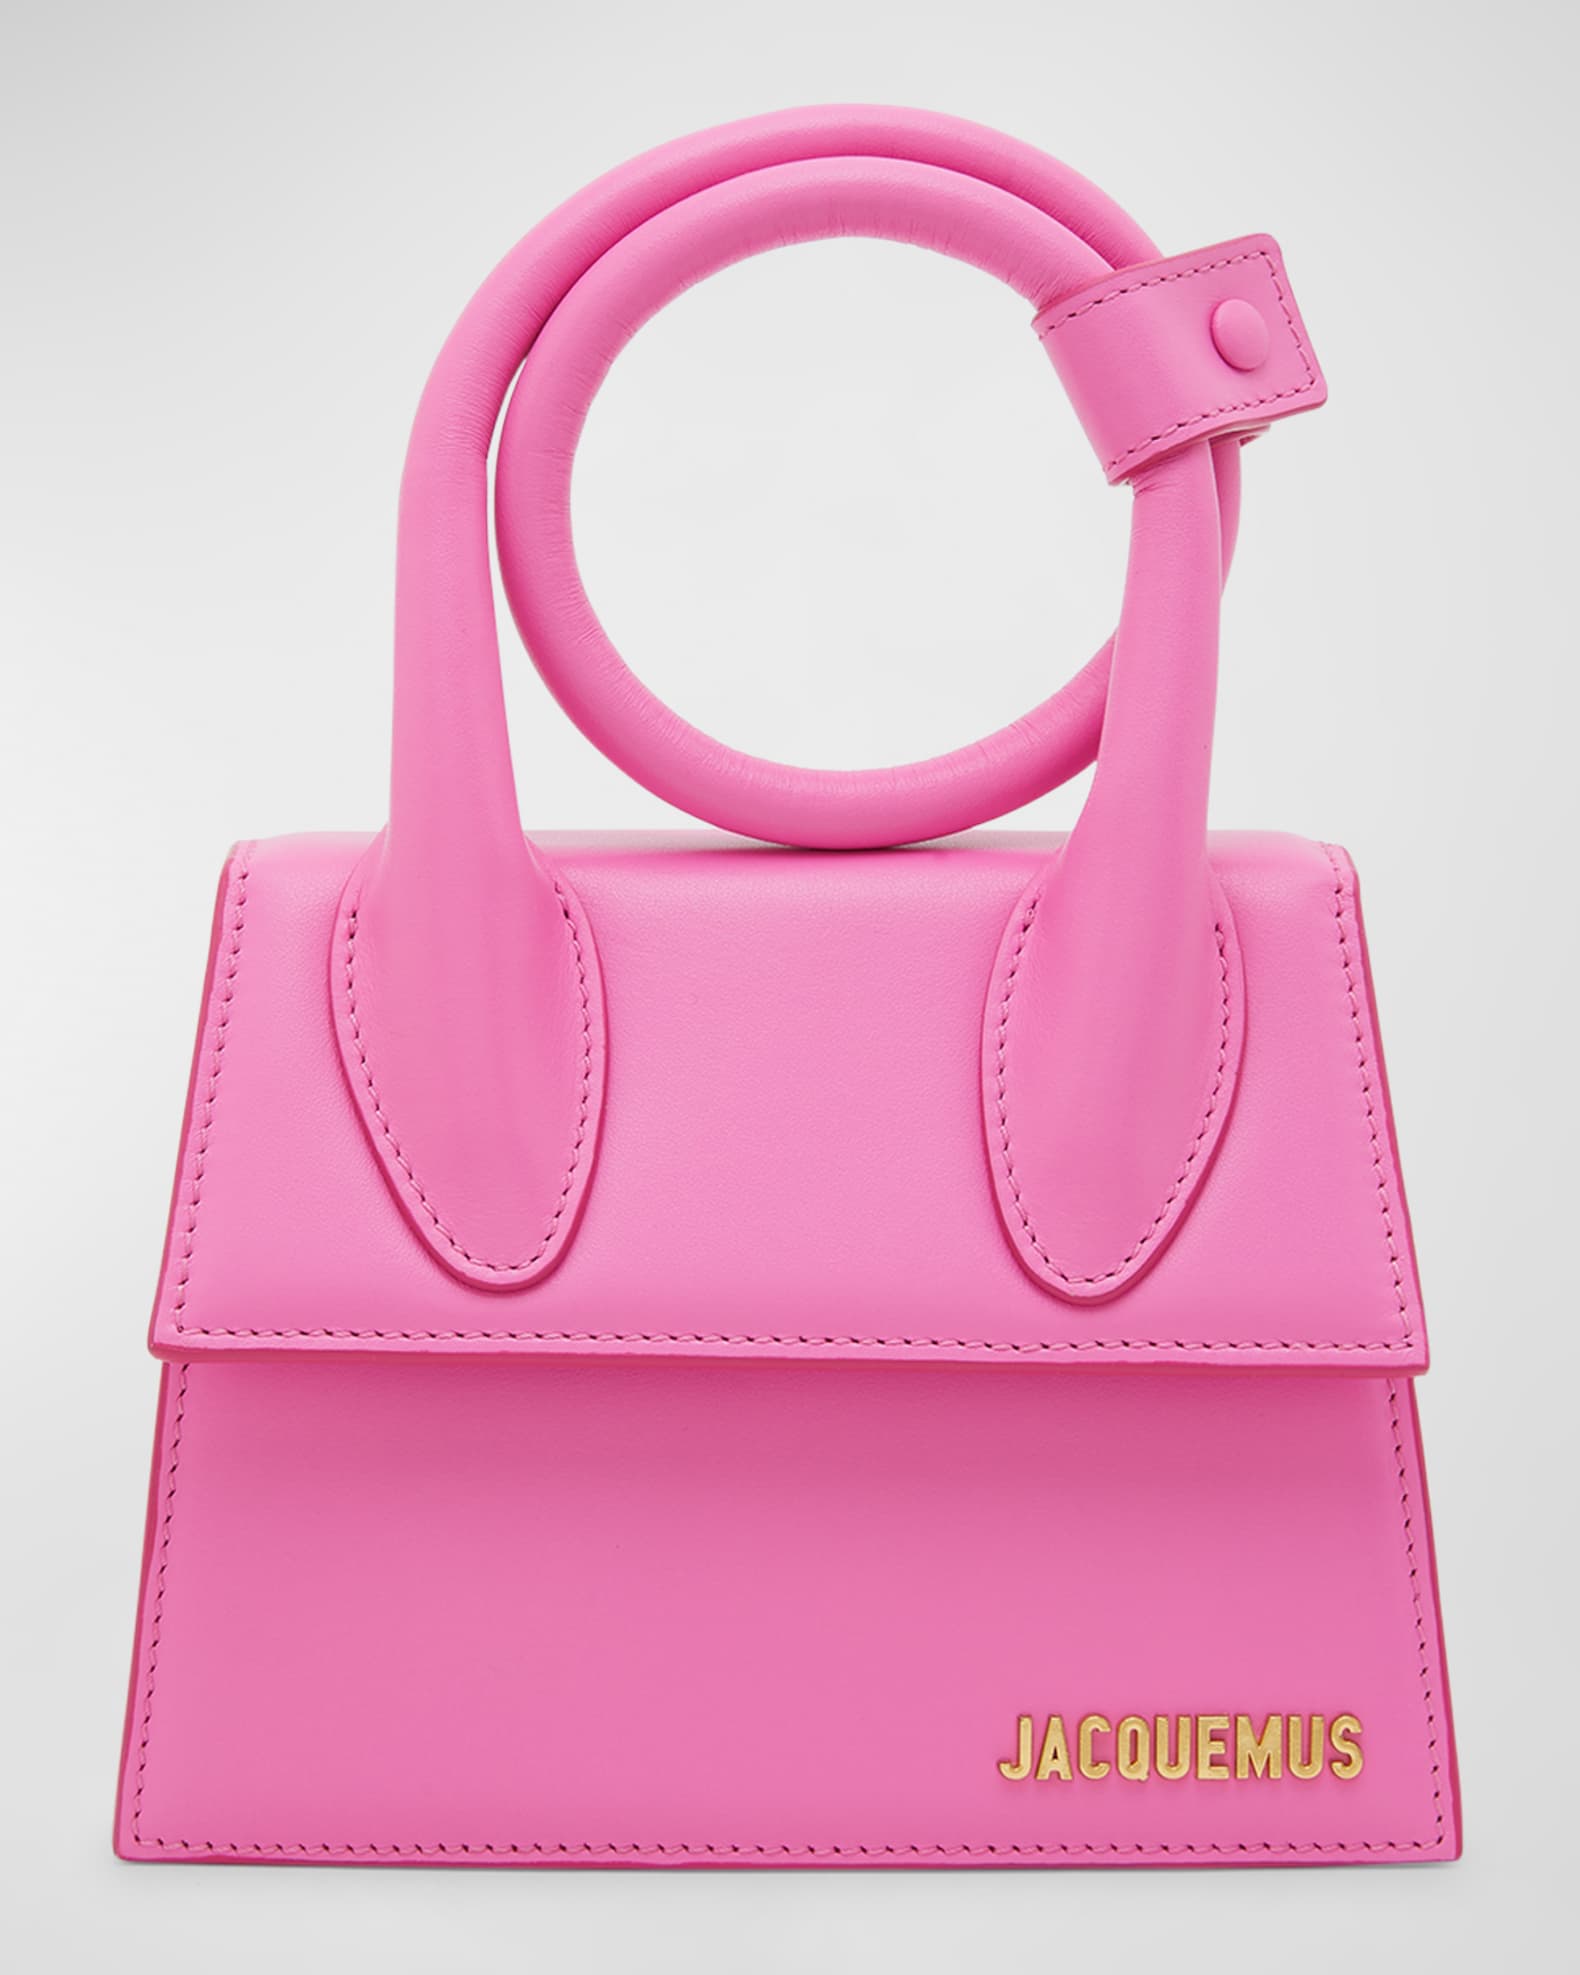 Jacquemus Pink Suede Le Chiquito Noeud Bag